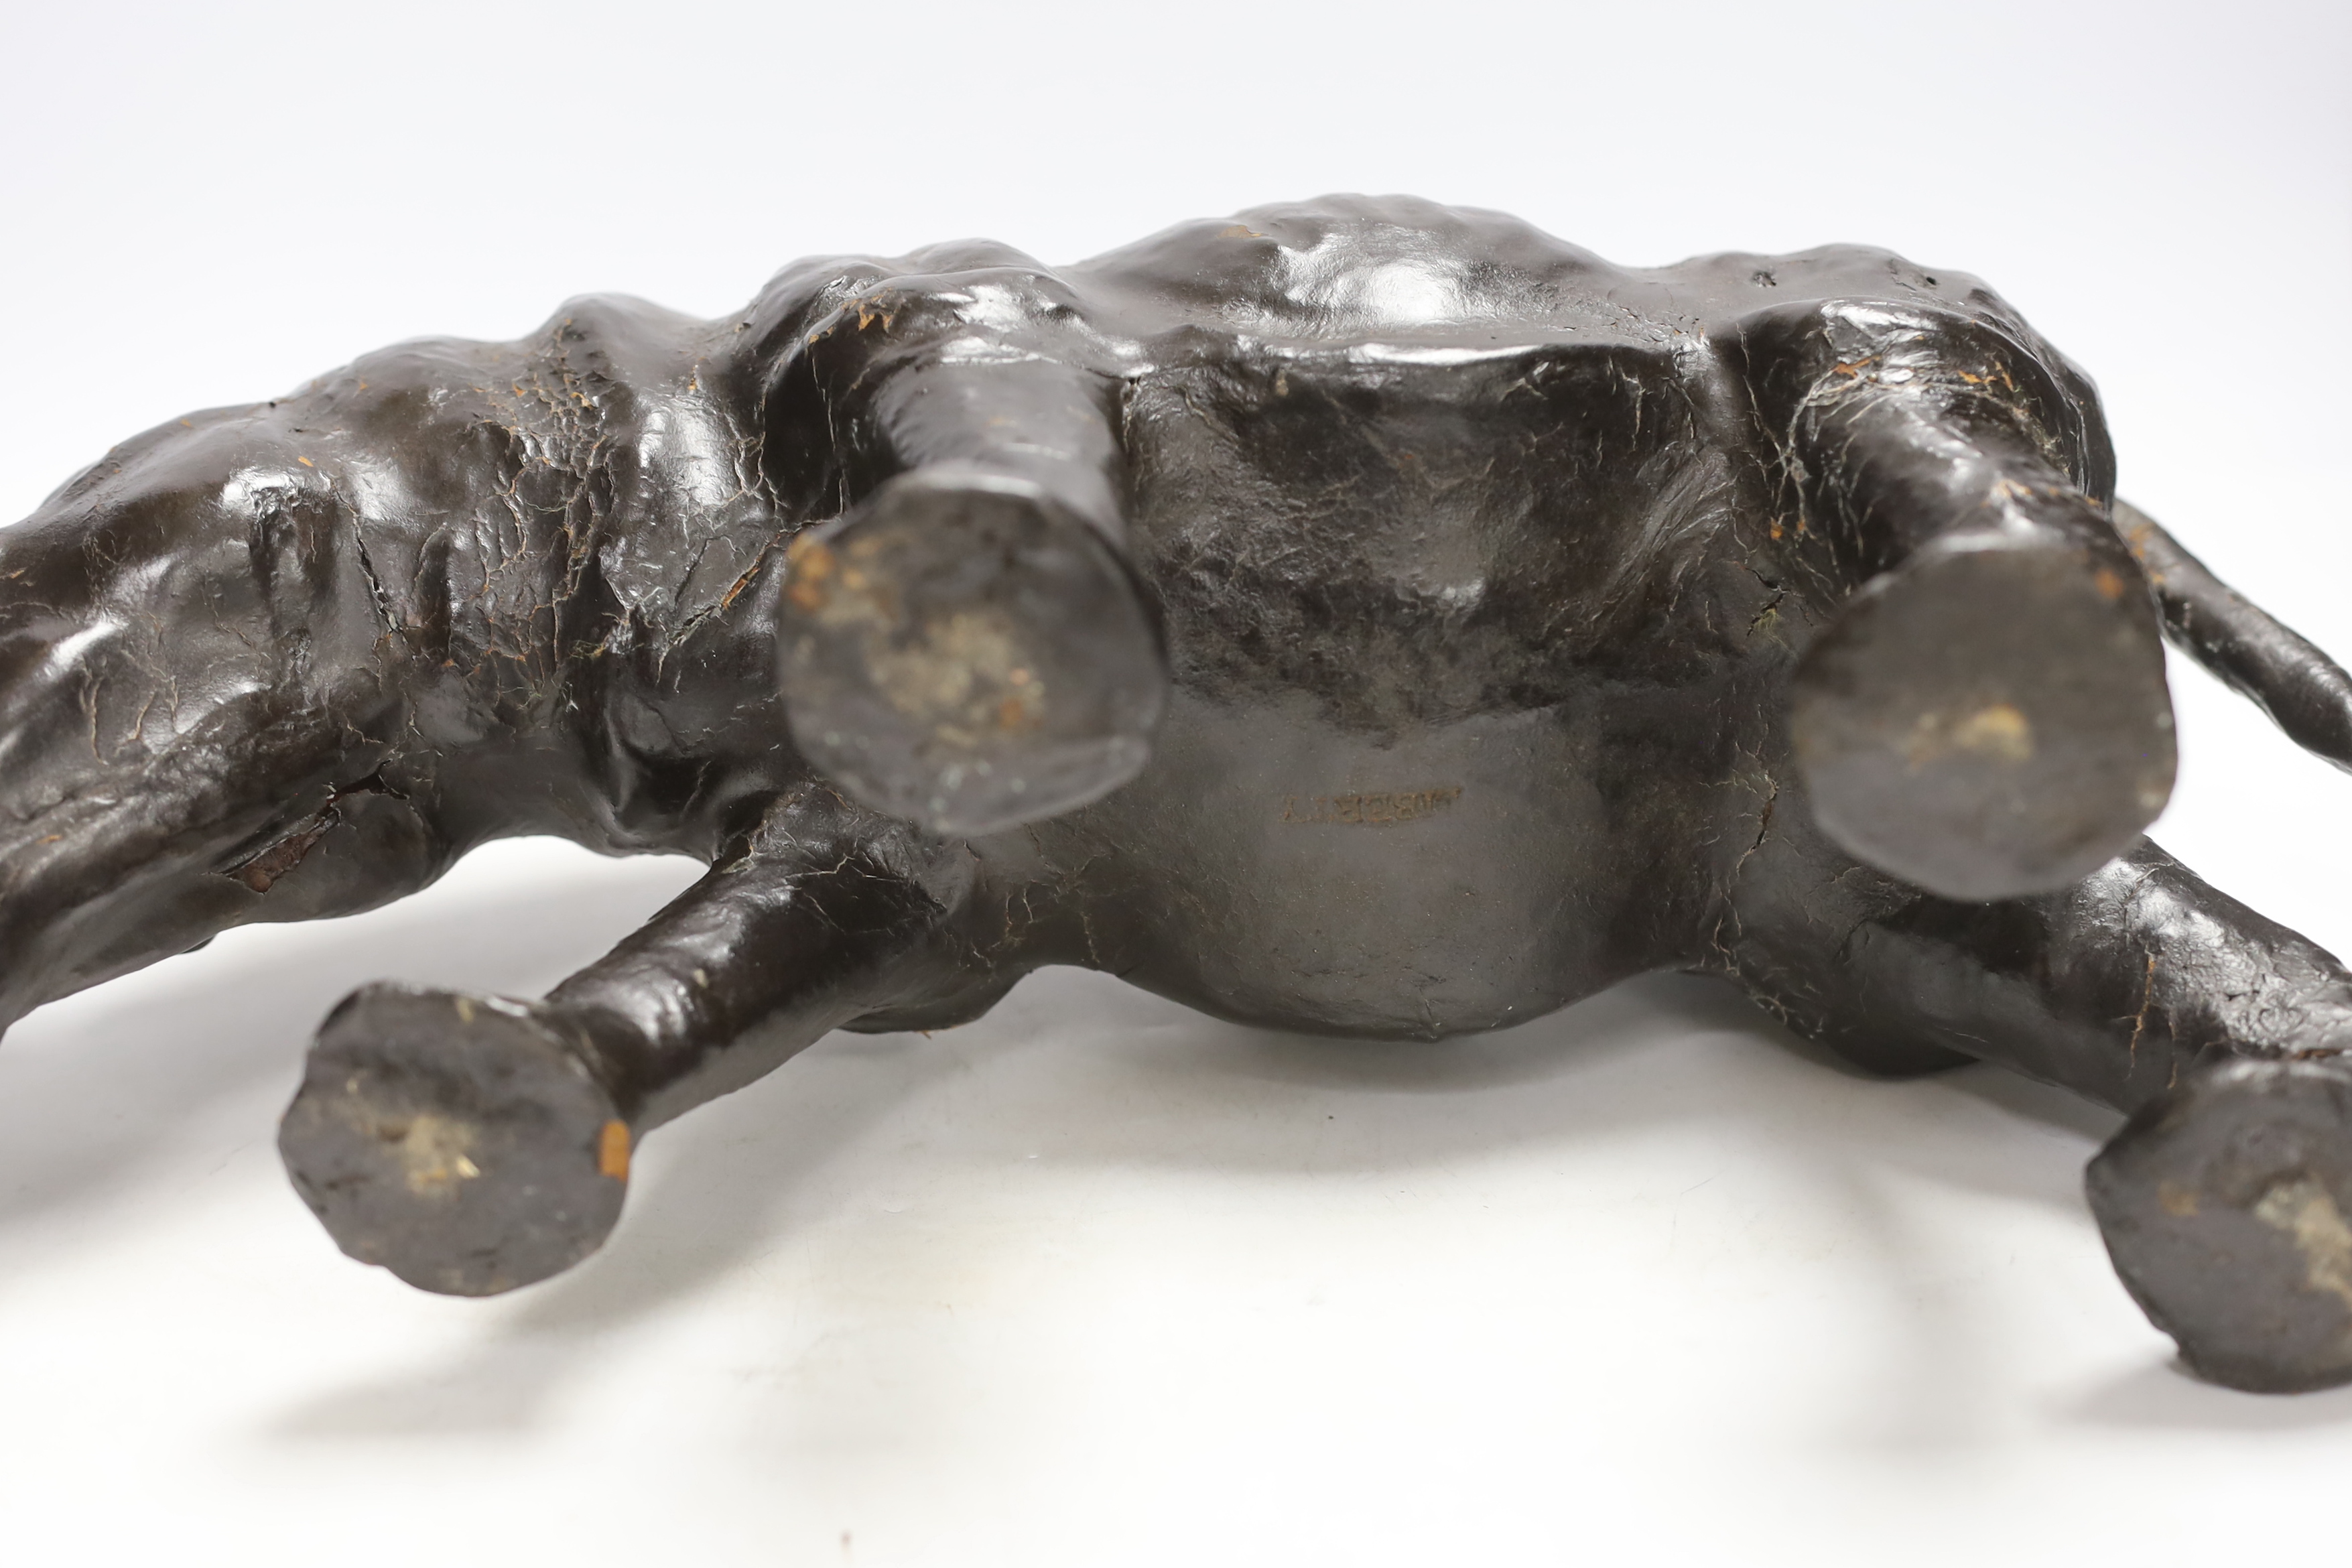 A leather rhinoceros figure with glass eyes, stamped Liberty to the underside, 54cm wide